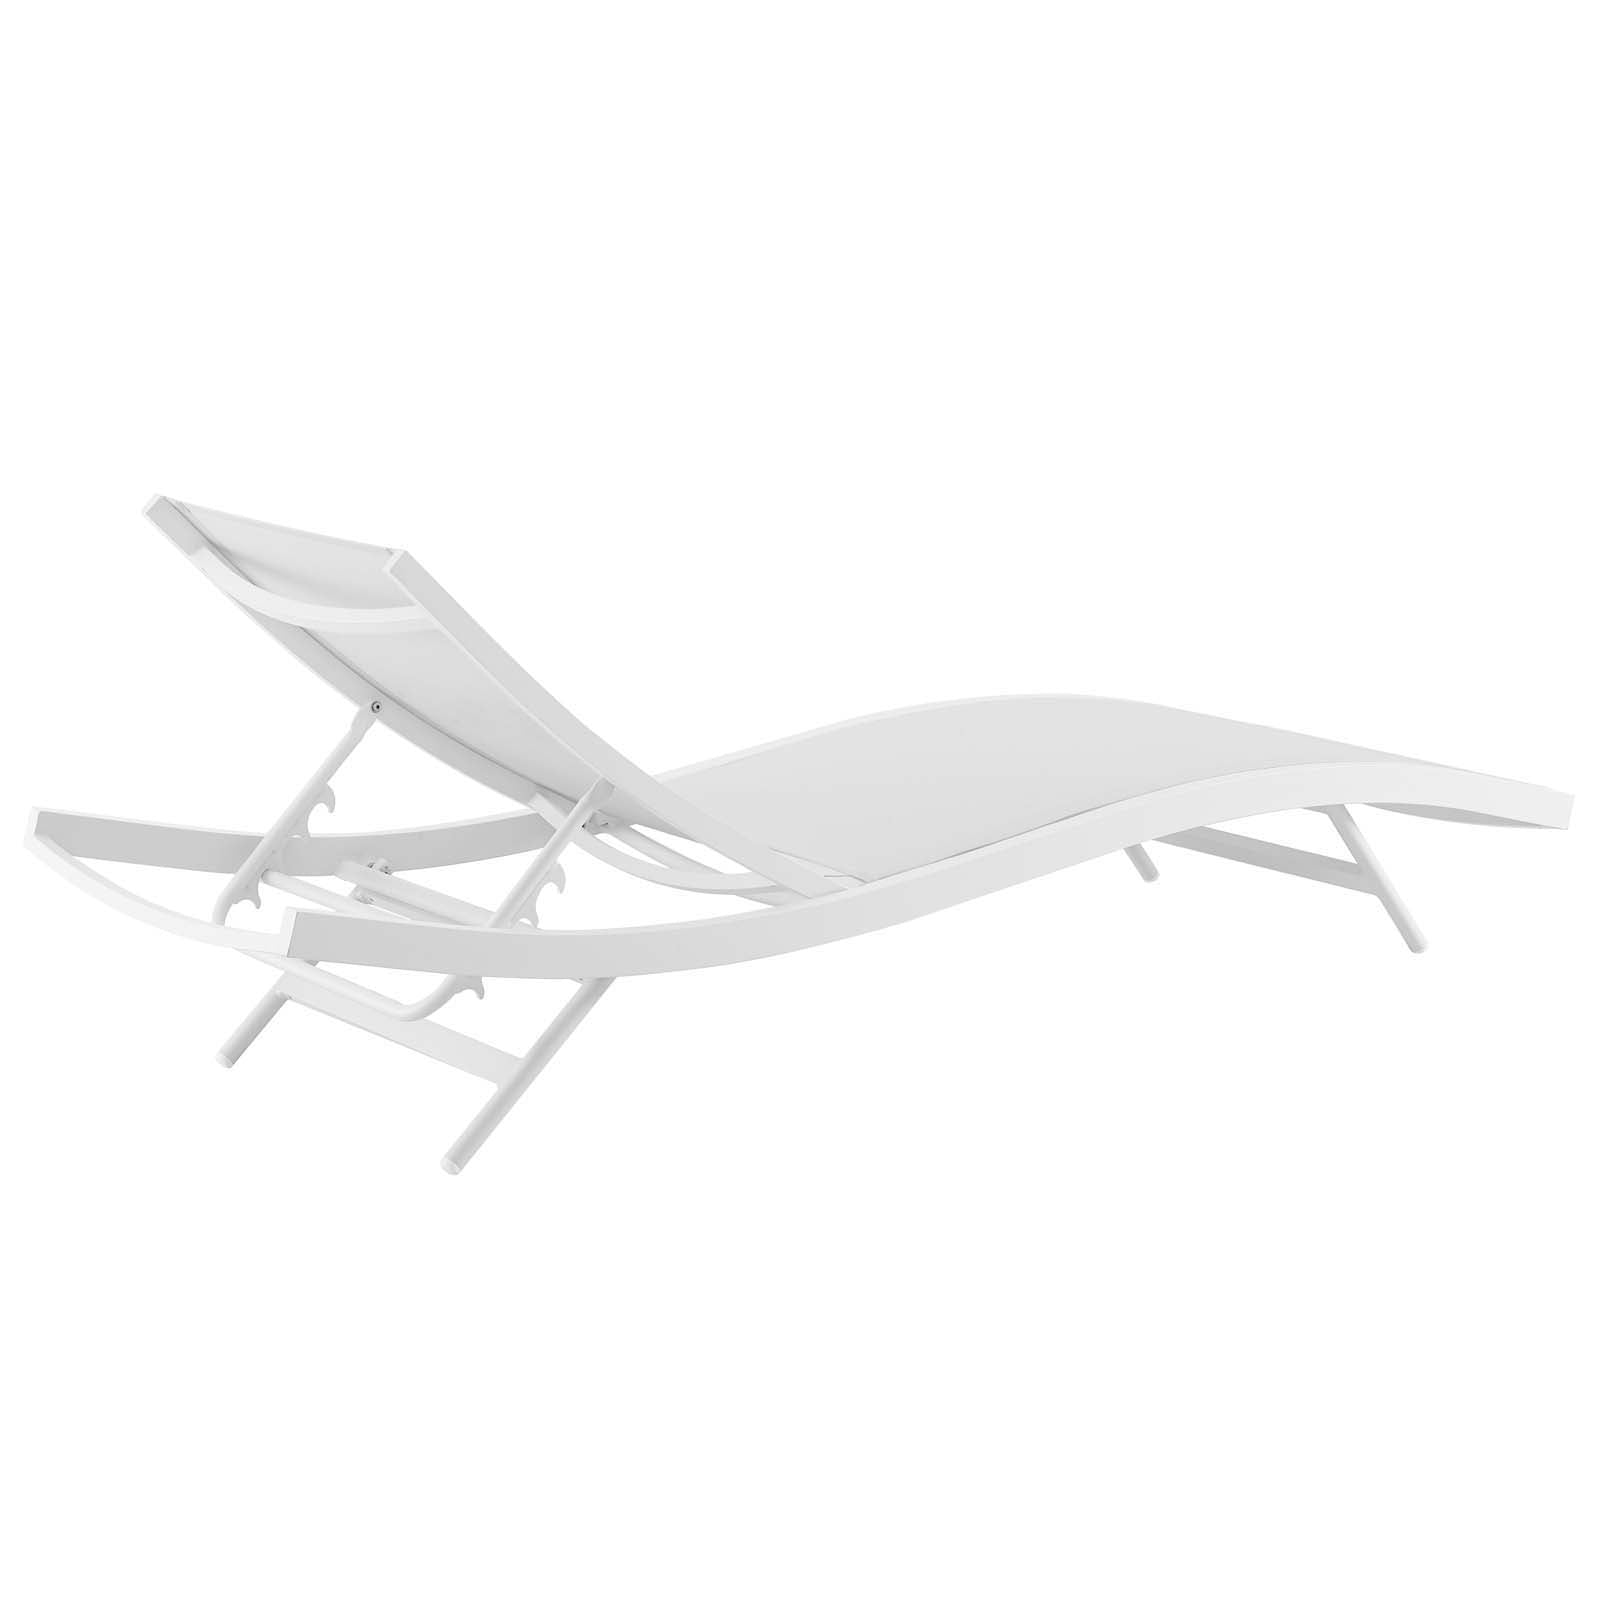 Glimpse Outdoor Patio Mesh Chaise Lounge Set of 2 - East Shore Modern Home Furnishings